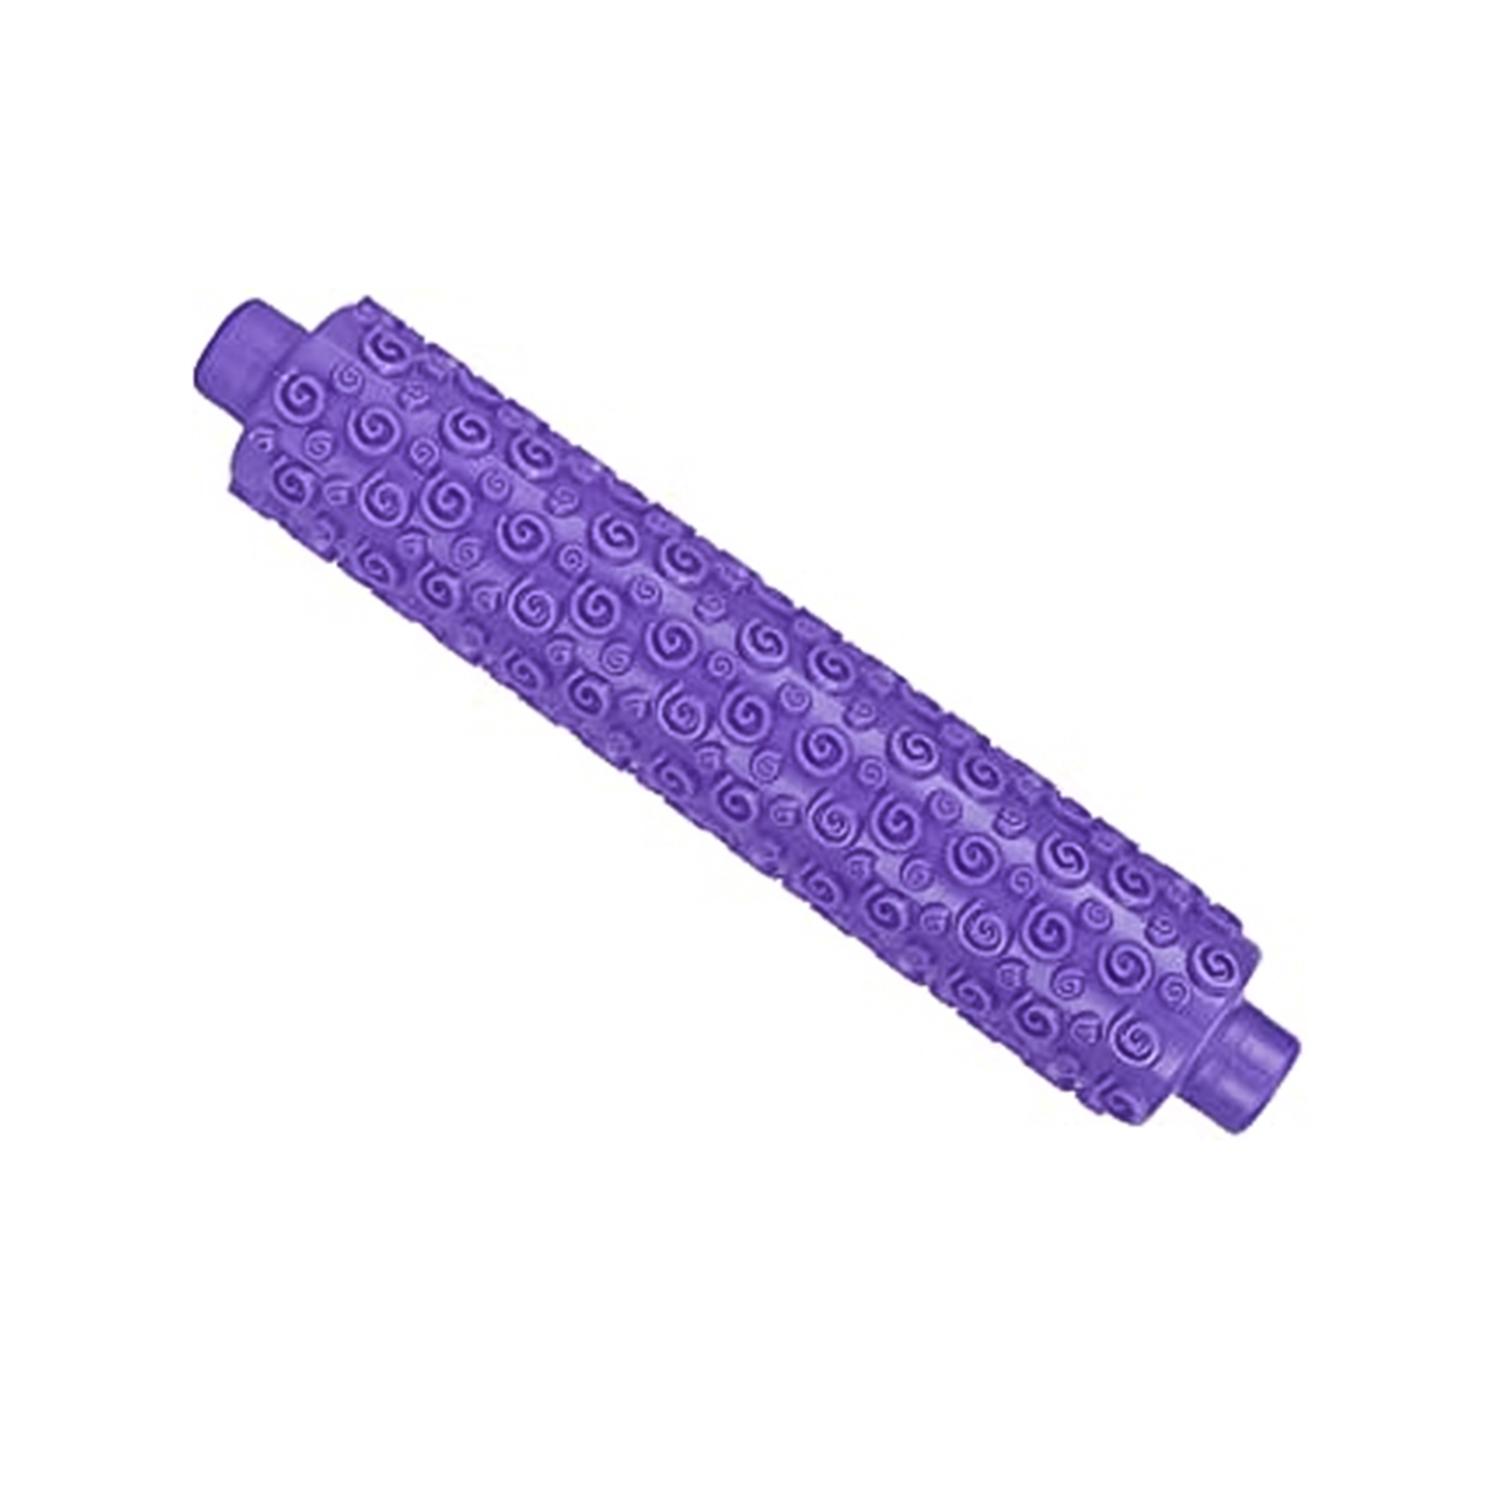 EMBOSSED ROLLING PIN 12 PURPLE WOVEN DESIGN